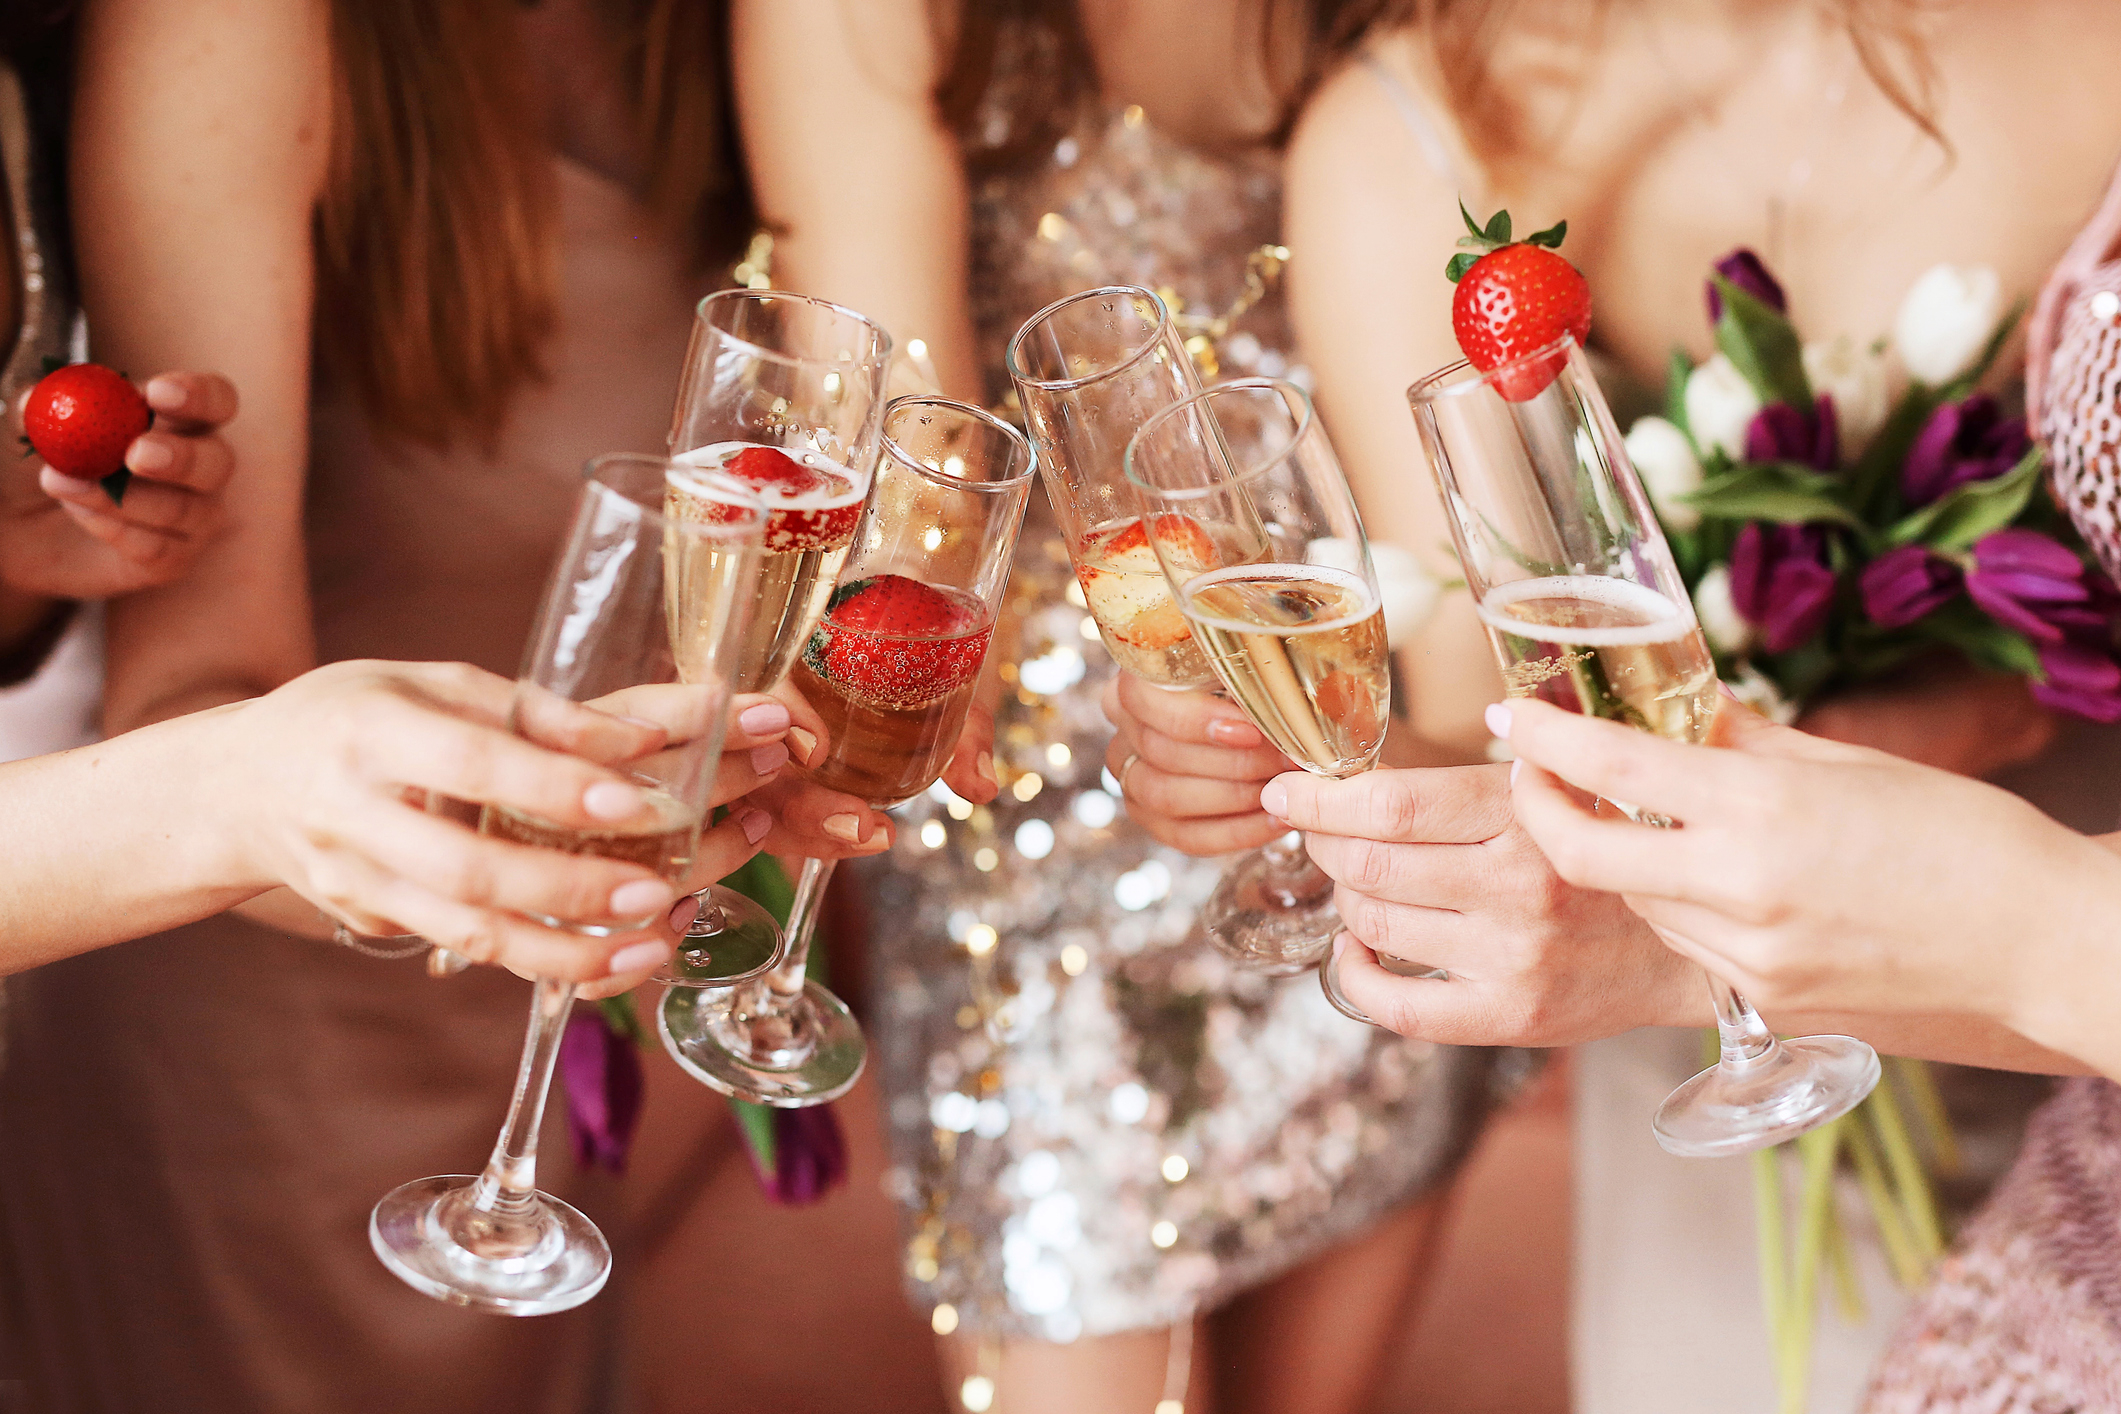 Group of people clinking champagne glasses, one with a strawberry, at a celebration